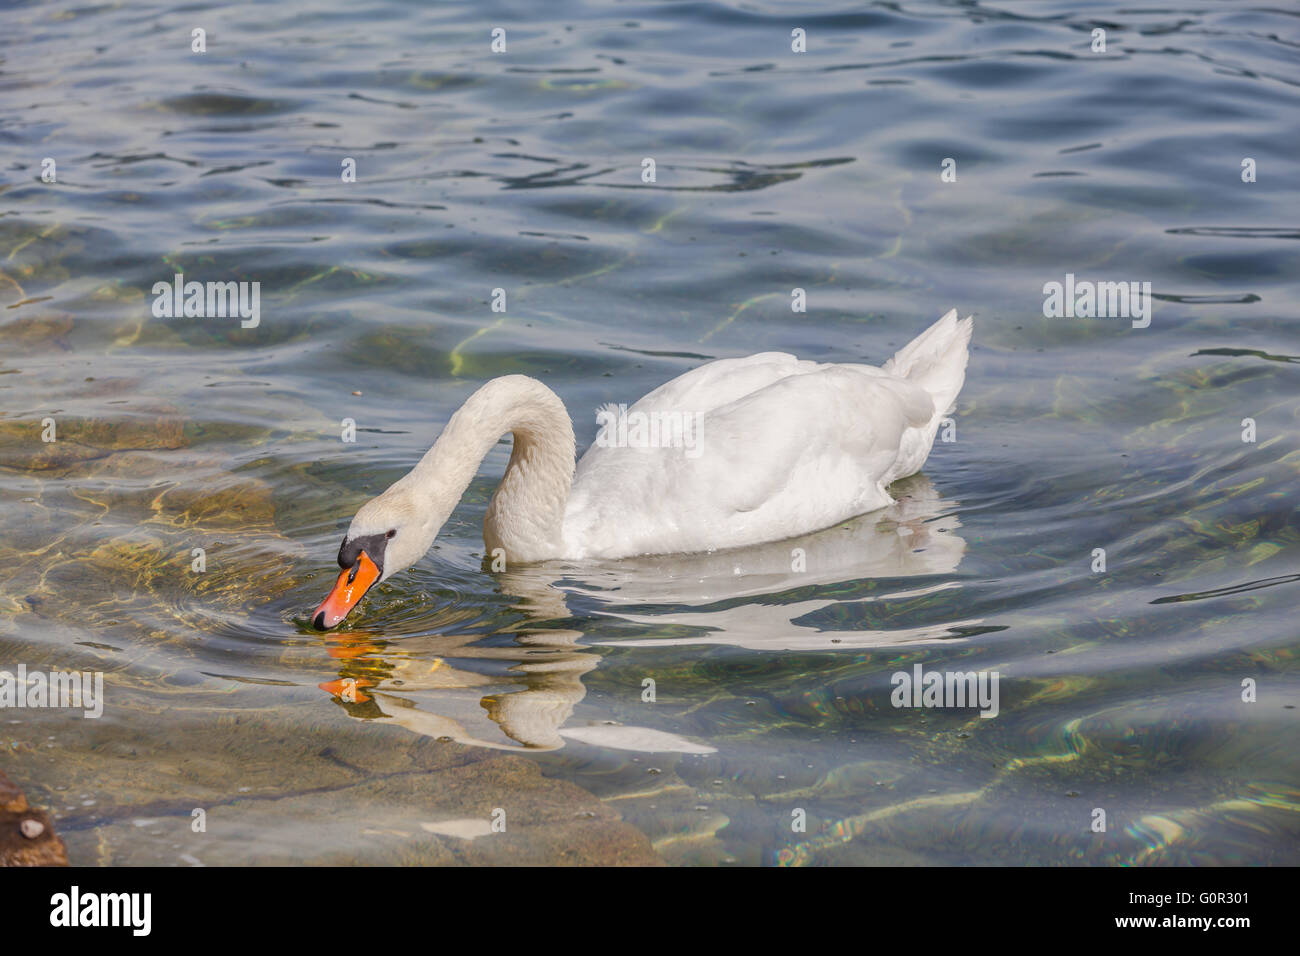 Close up view of a white swan drinking water in a lake. Stock Photo